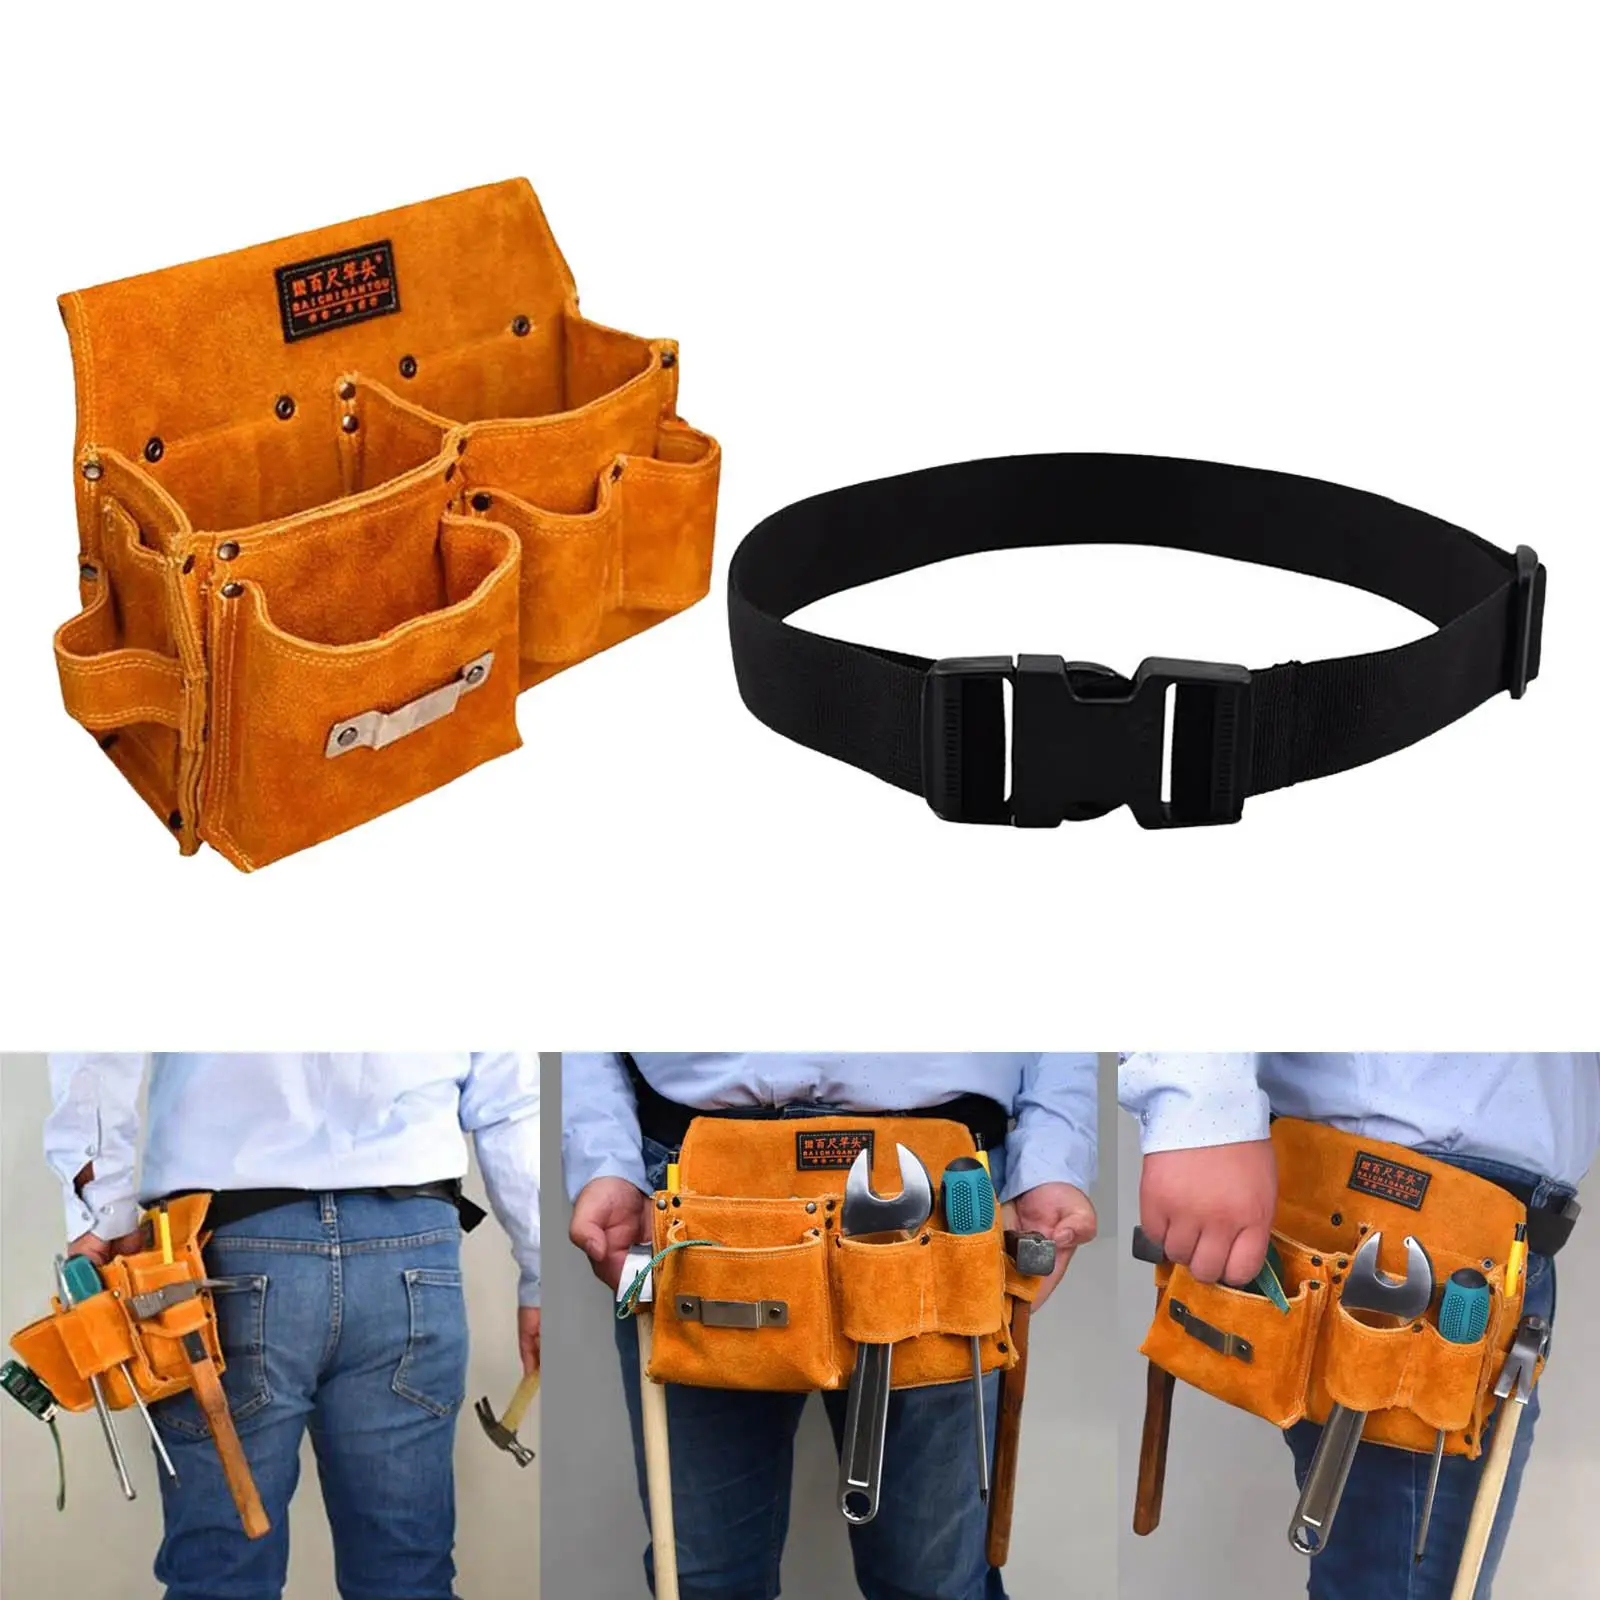 Retro Tool Bag Water Proof Large Capacity Organizer Durable Portable Waist Pack Holder Tool Belt Bag for Electrician Woodworking